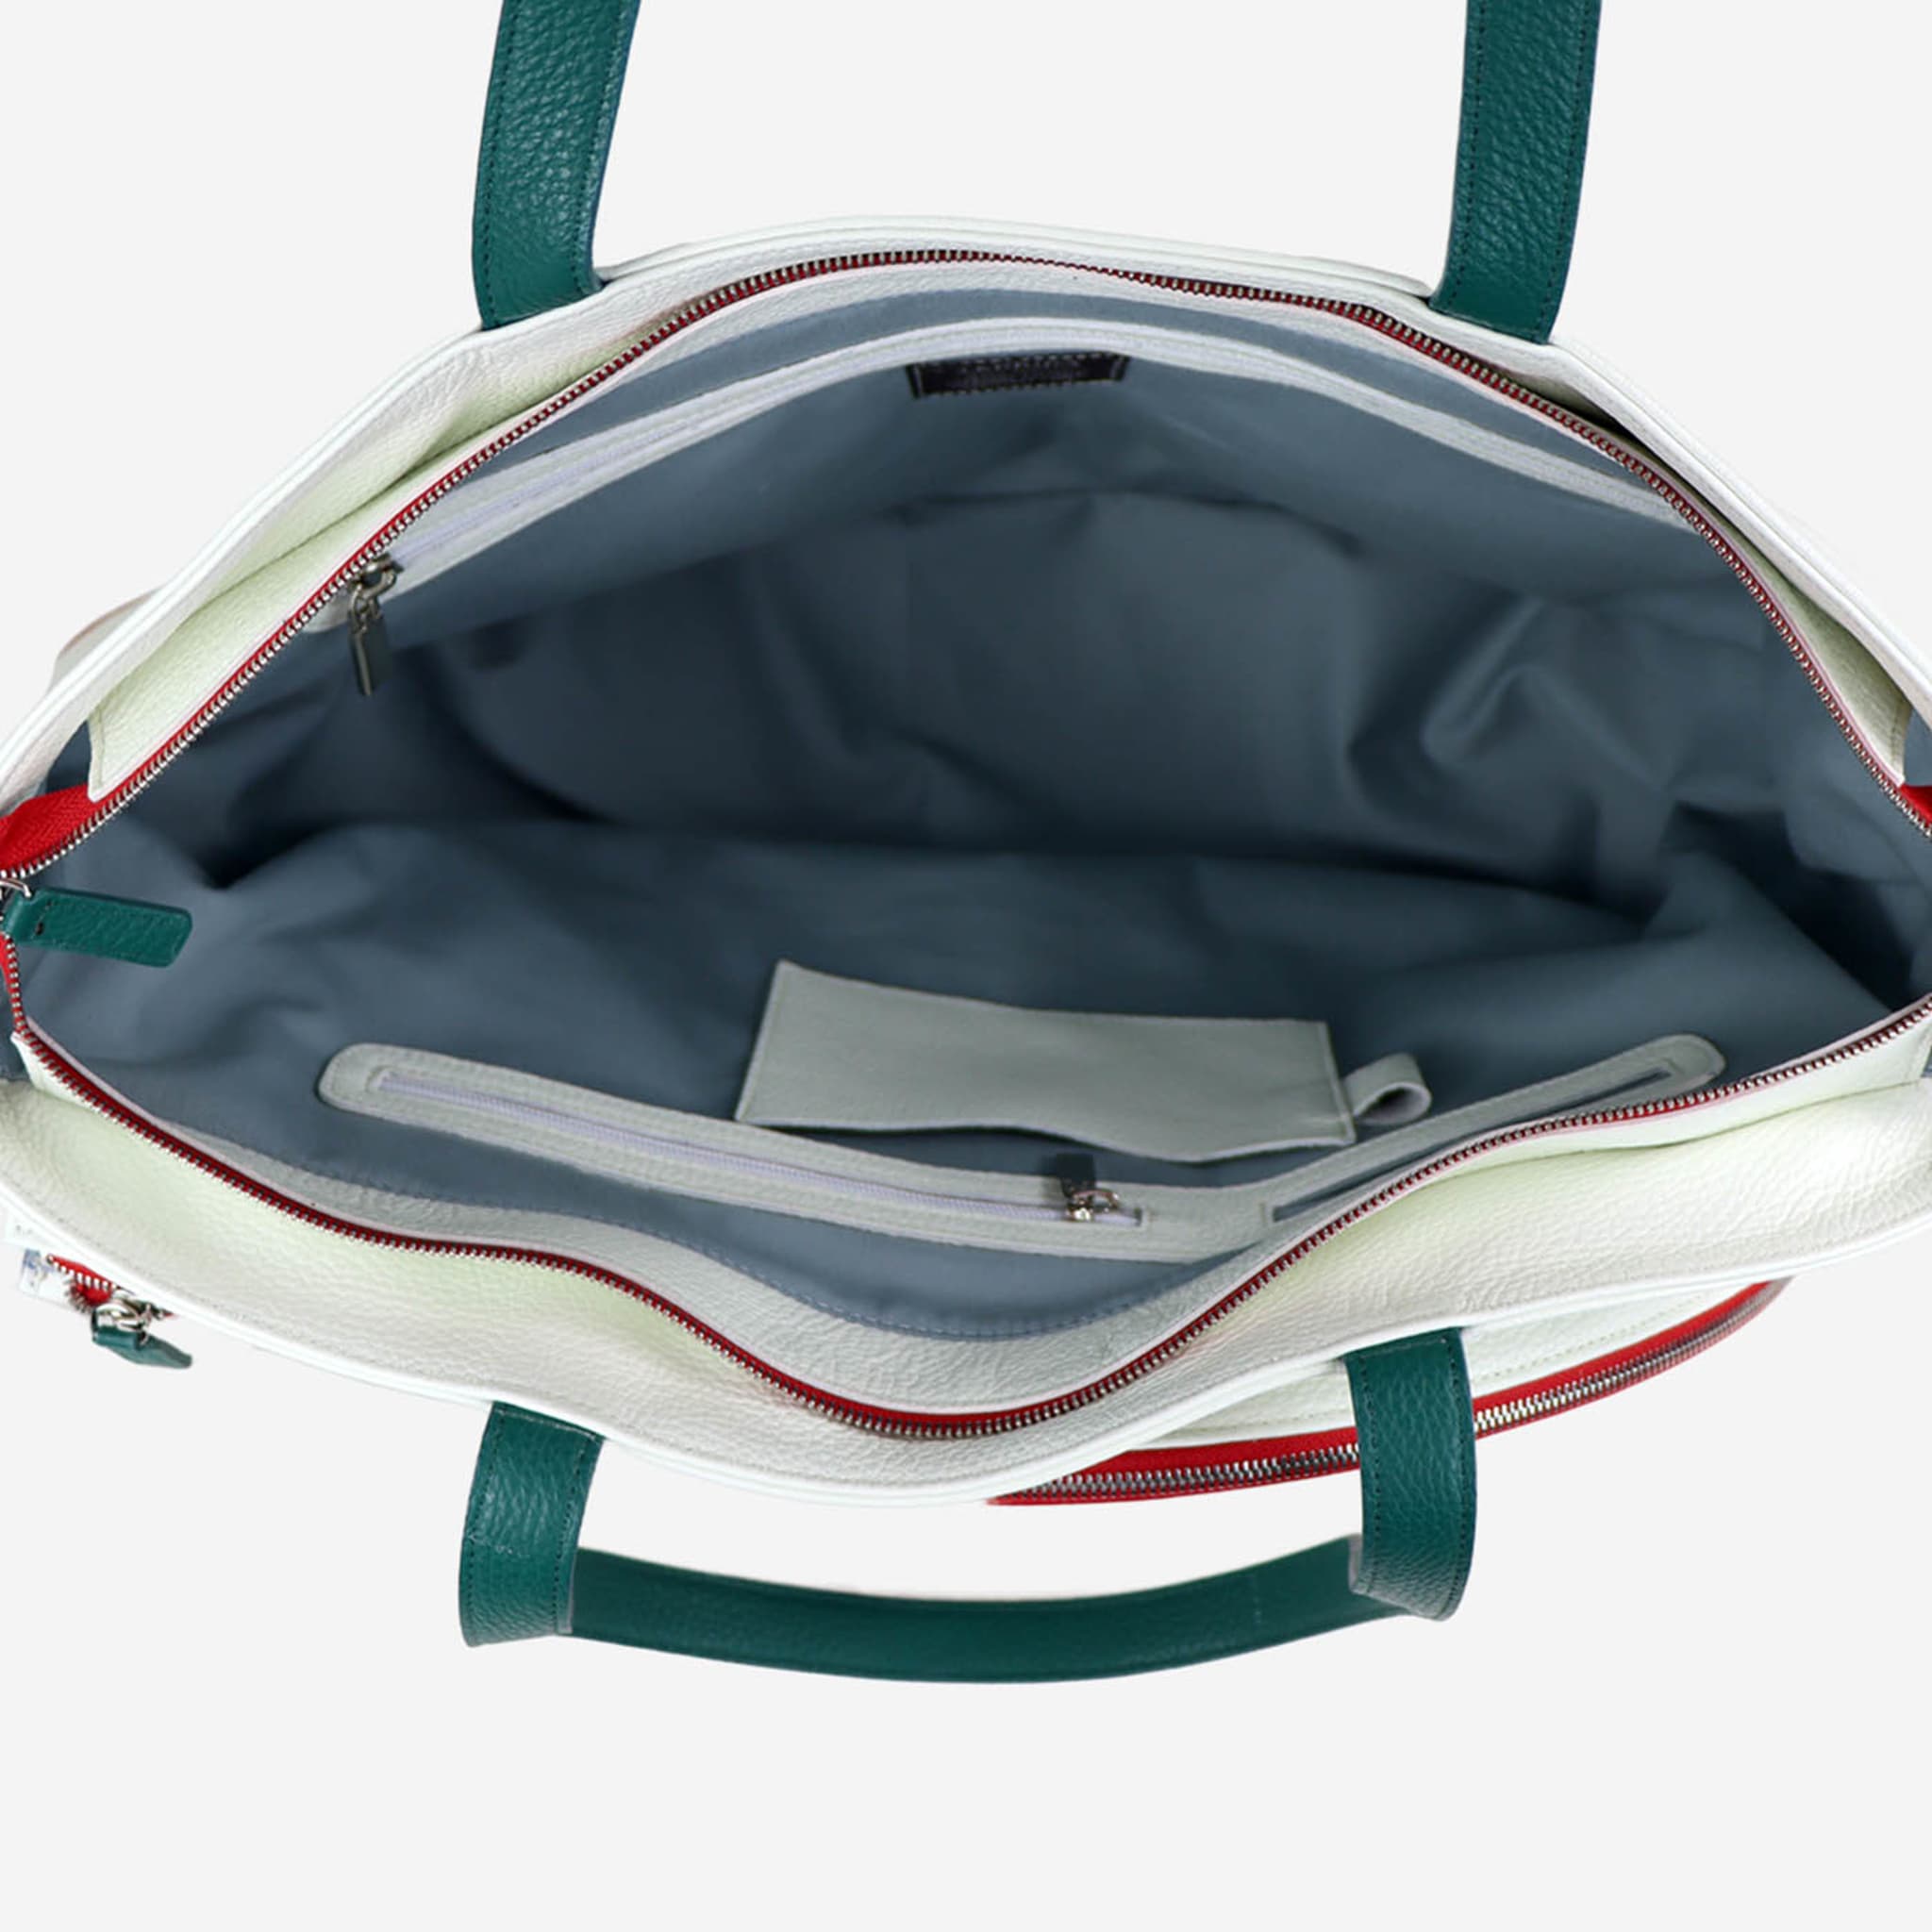 Sport White & Red Bag with Tennis-Racket-Shaped Pocket - Alternative view 2